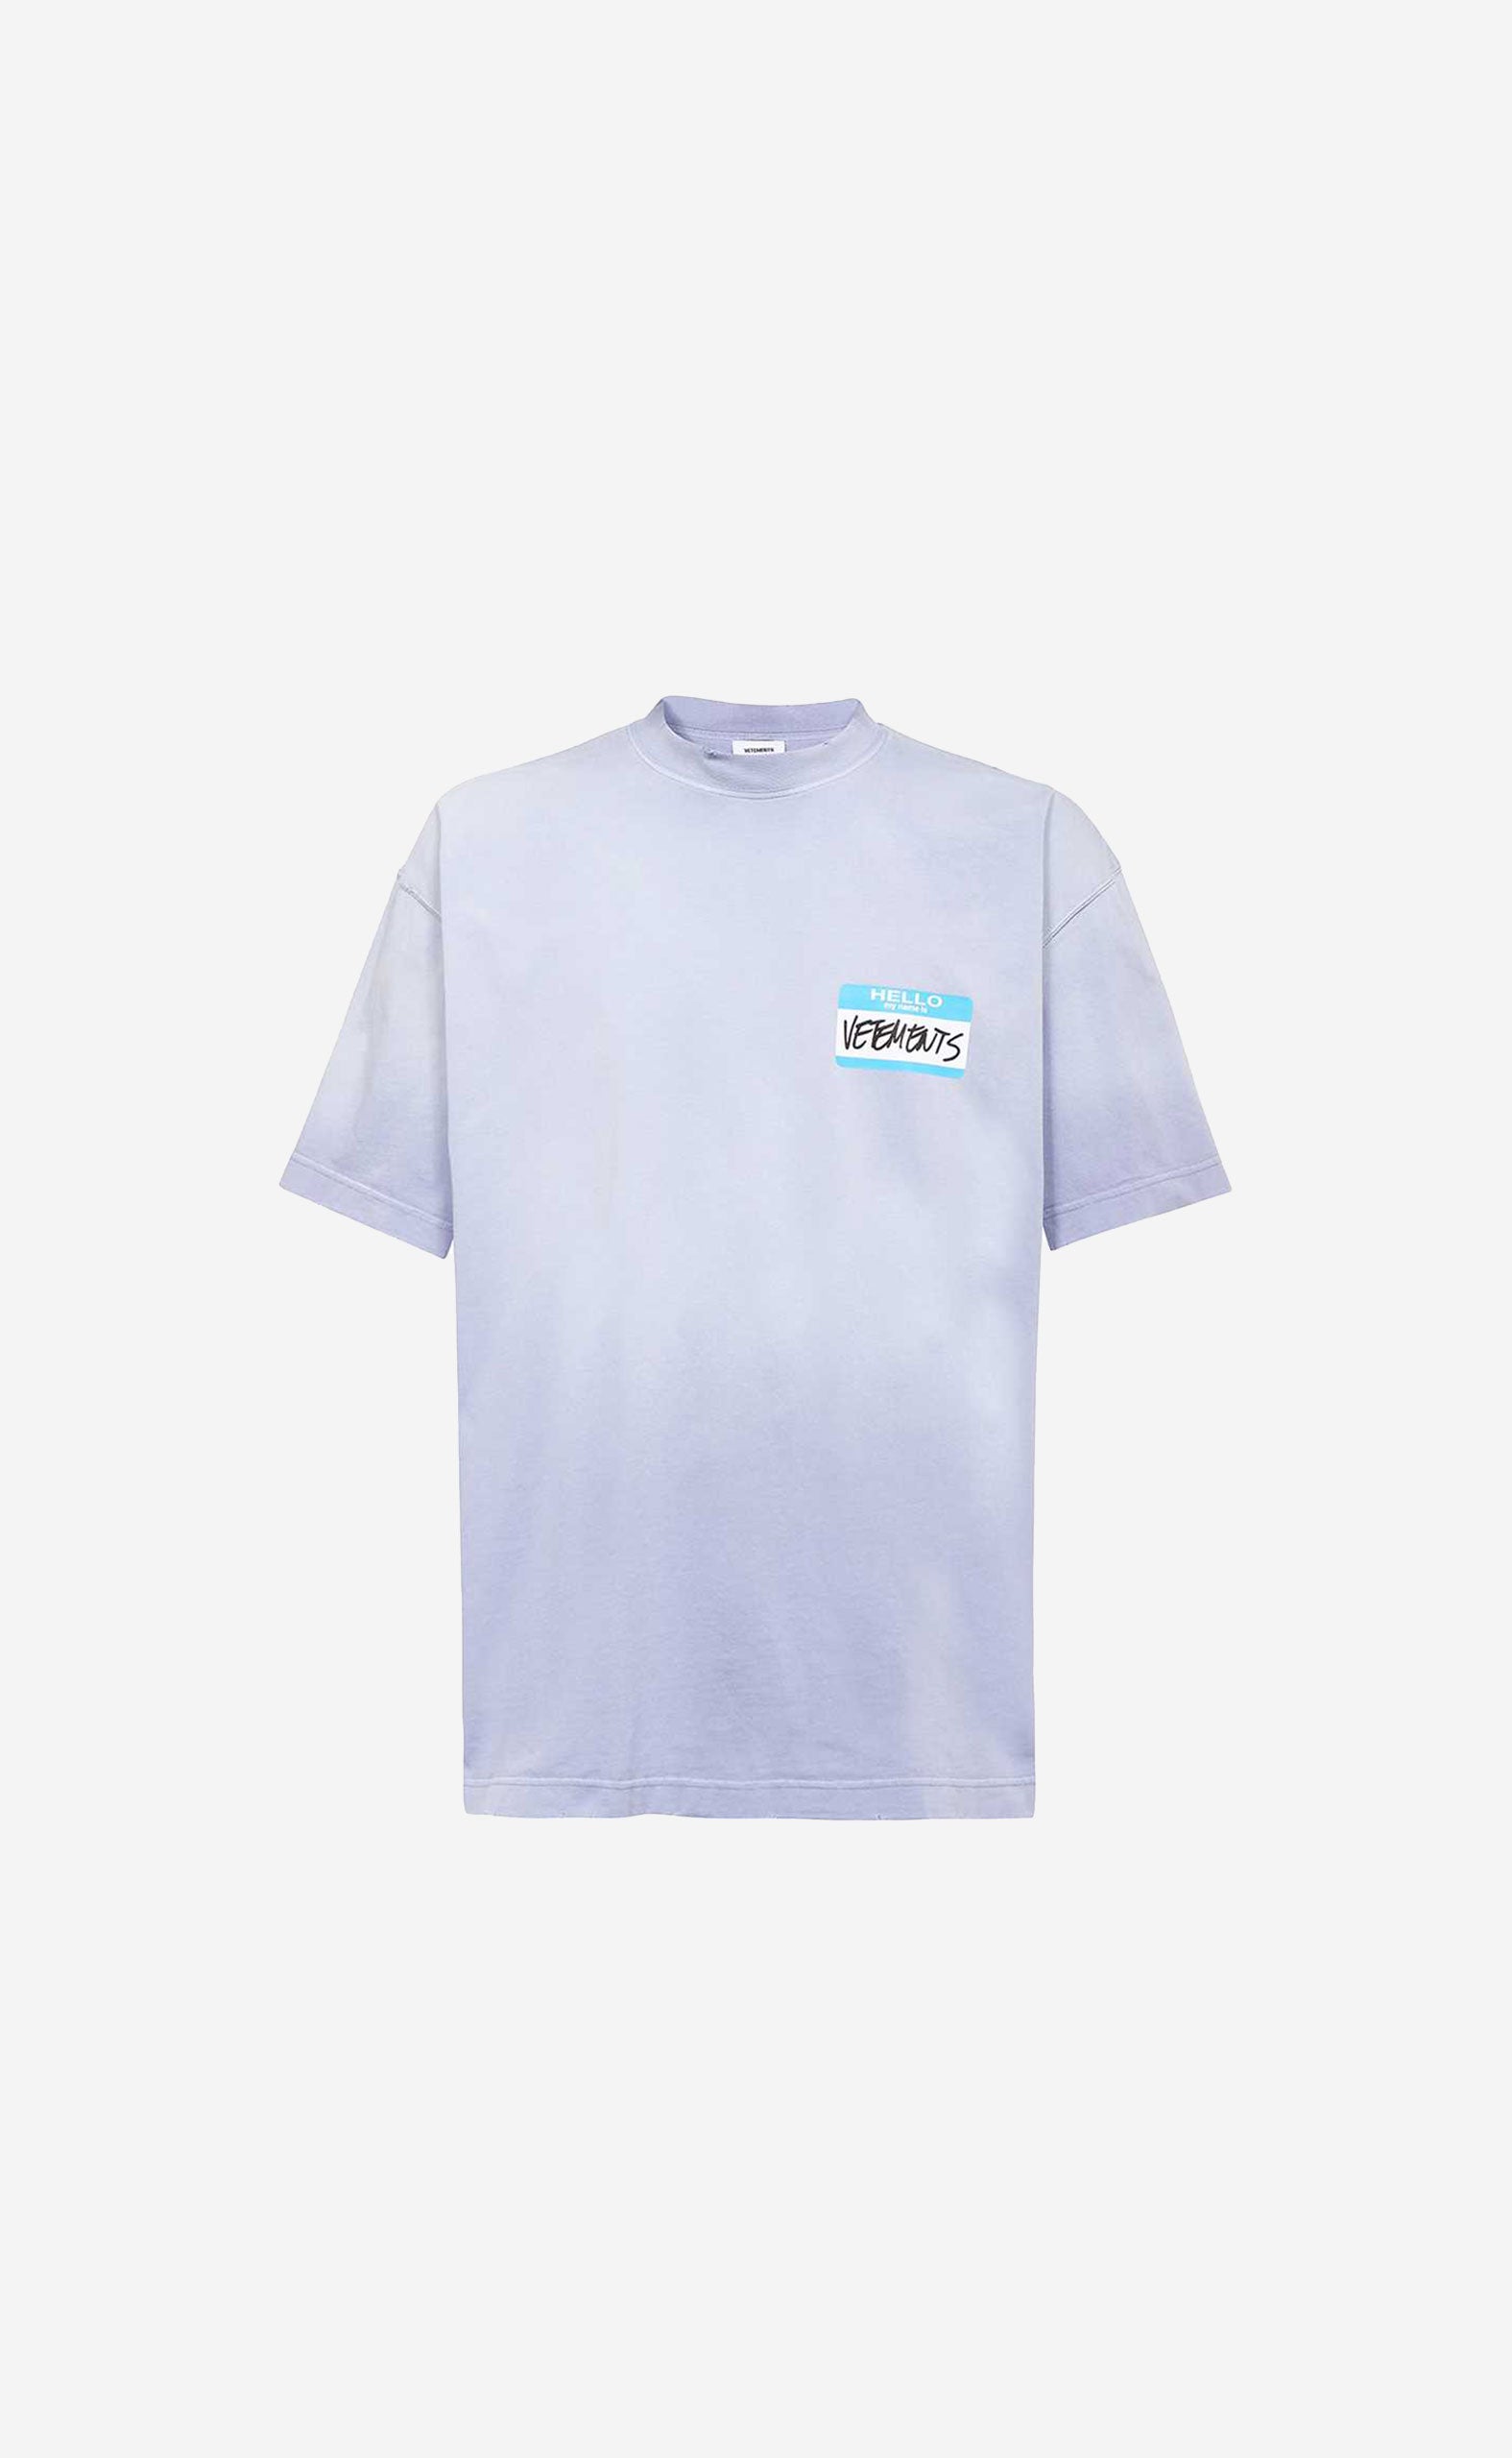 MY NAME IS VETEMENTS FADED T-SHIRT PURPLE